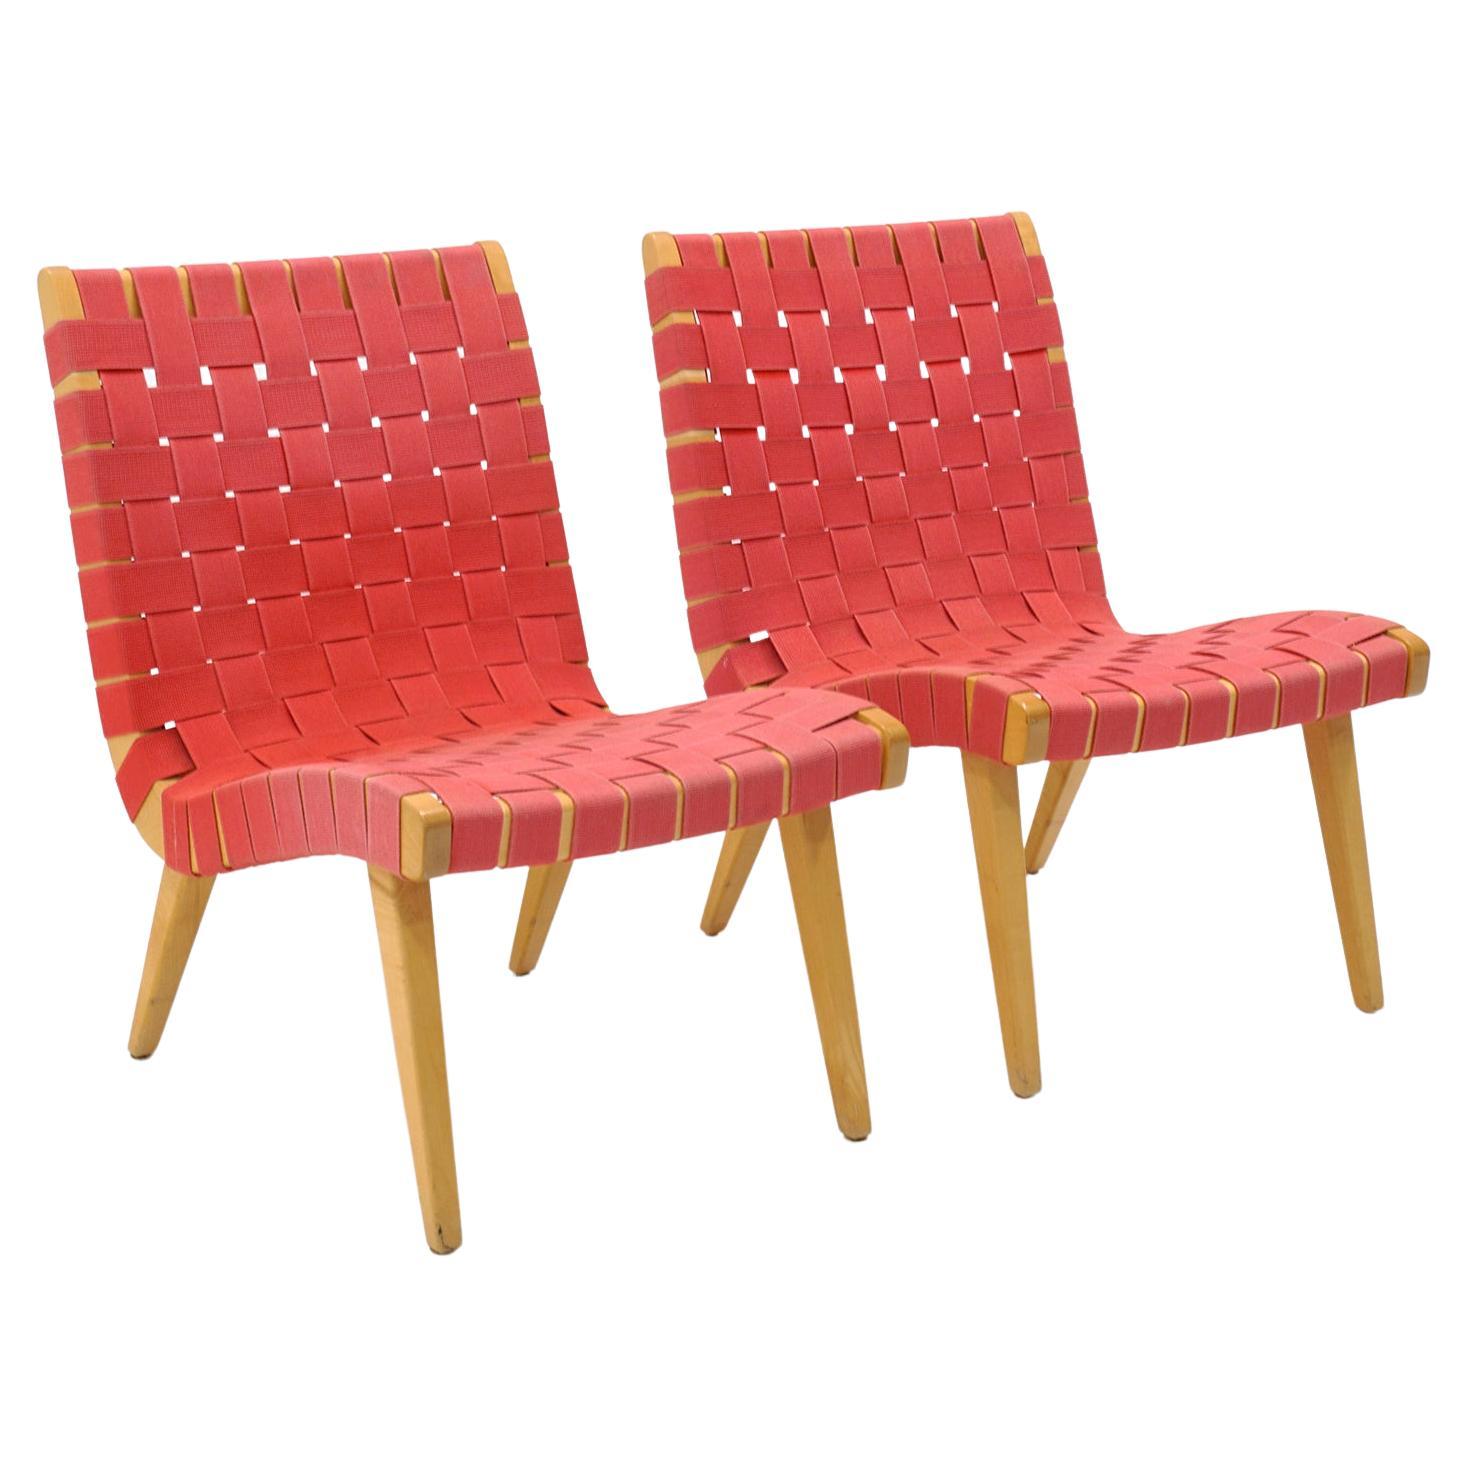 Pair Jens Risom Armless Lounge Chairs. Maple with Red Webbing. Signed.